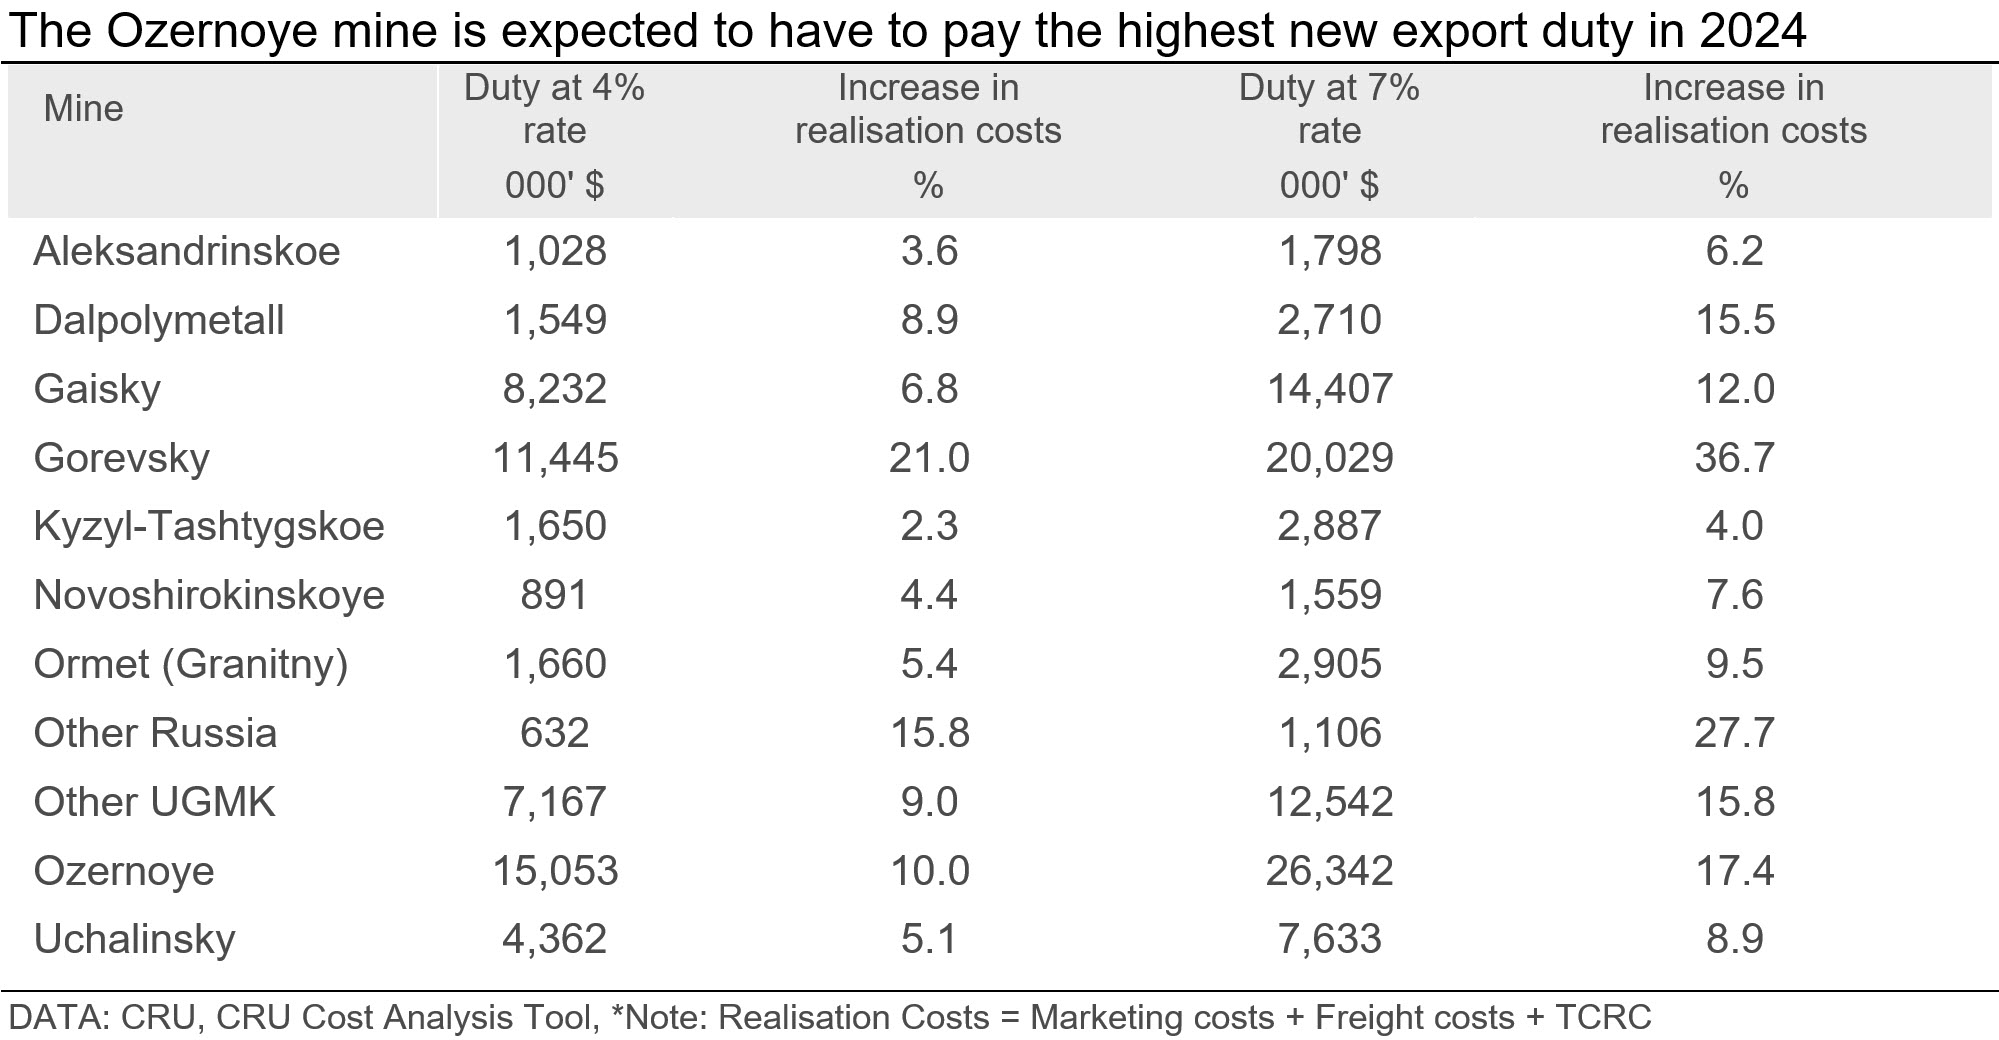 Chart showing that the Ozernoye mine is expected to have to pay the highest new export duty in 2024